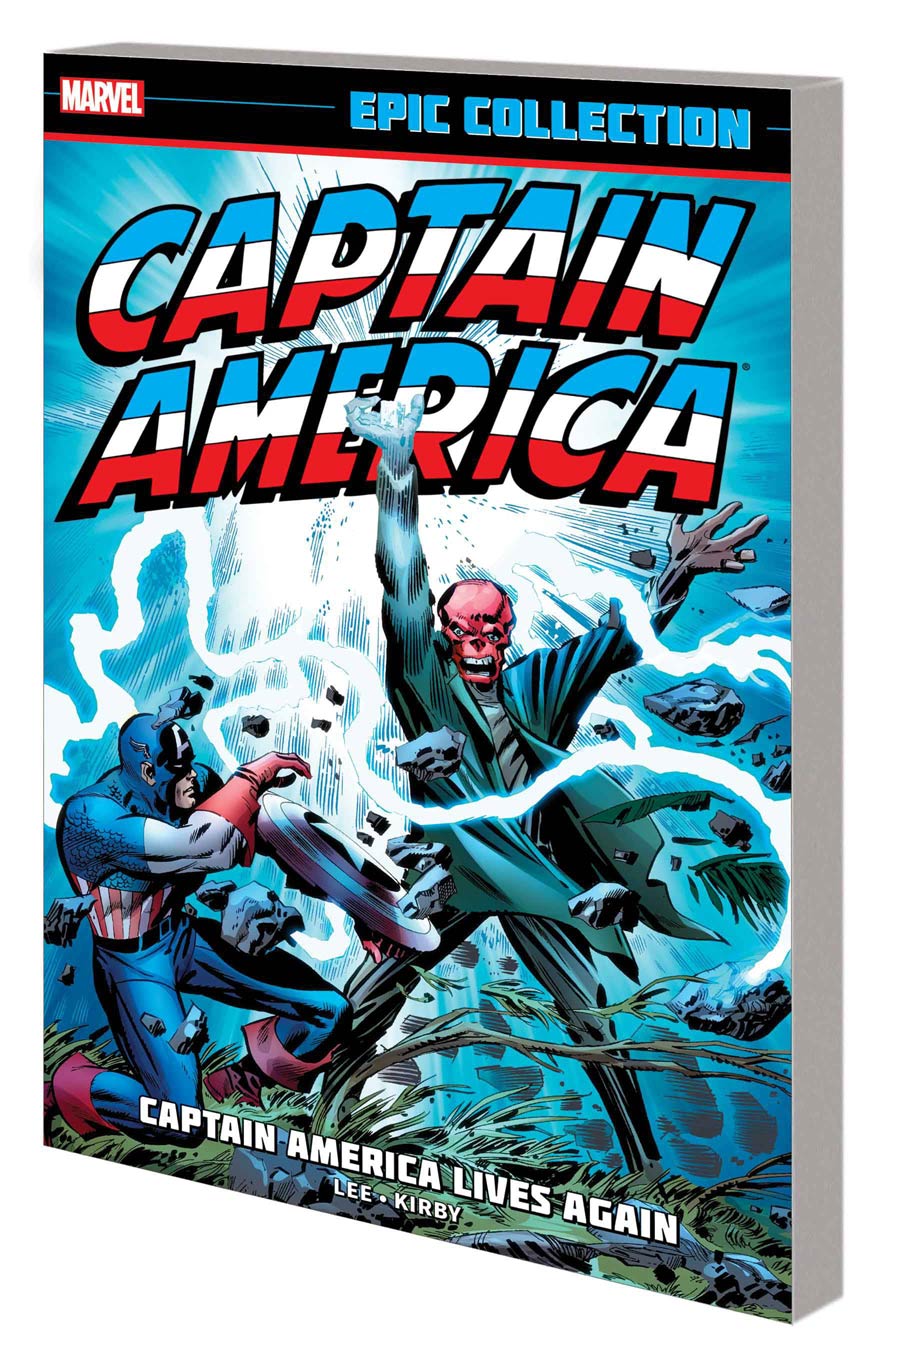 Captain America Epic Collection Vol 1 Captain America Lives Again TP New Printing